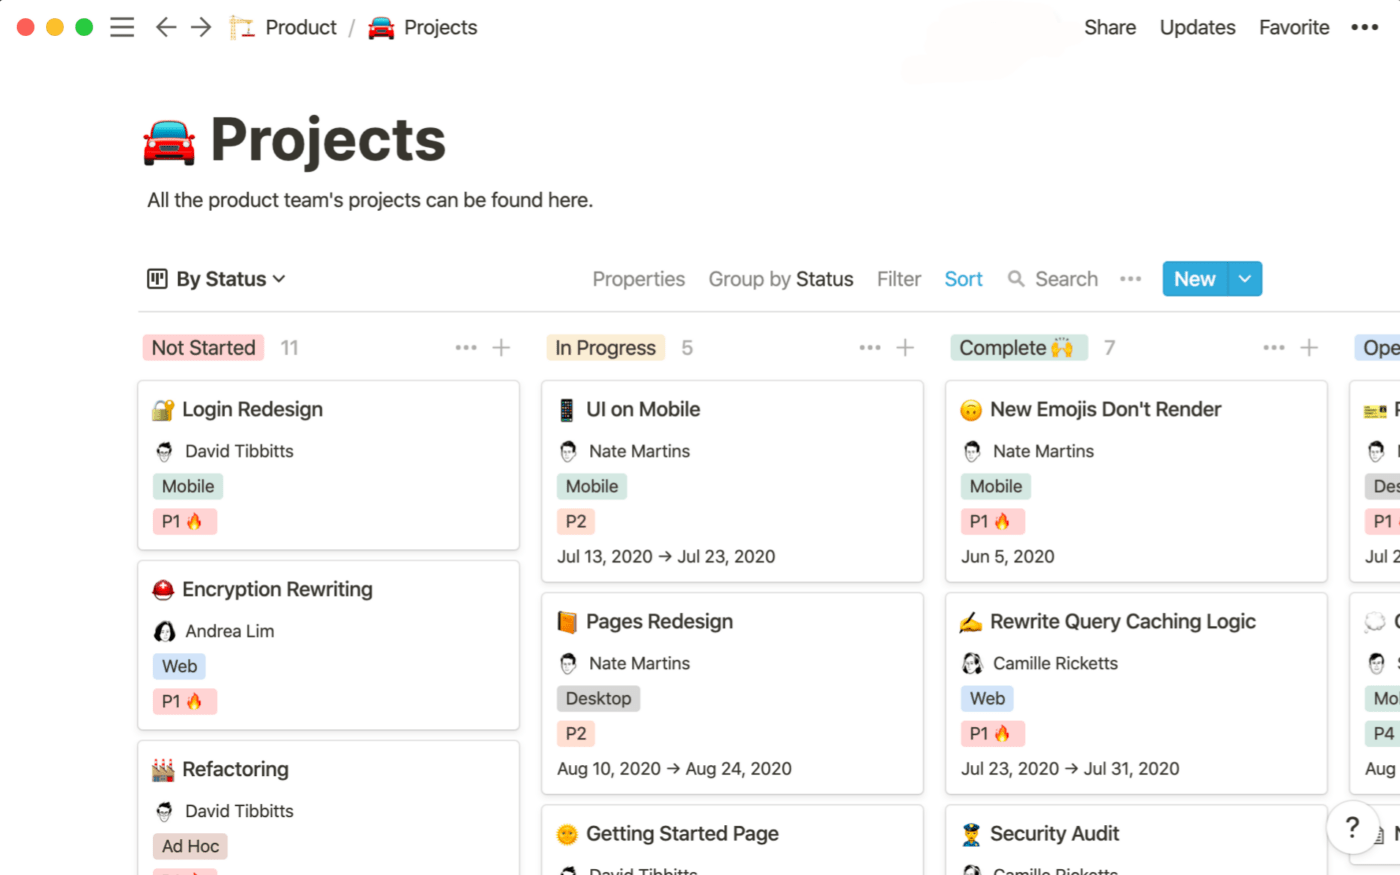 Project dashboard using Notion's project management software features